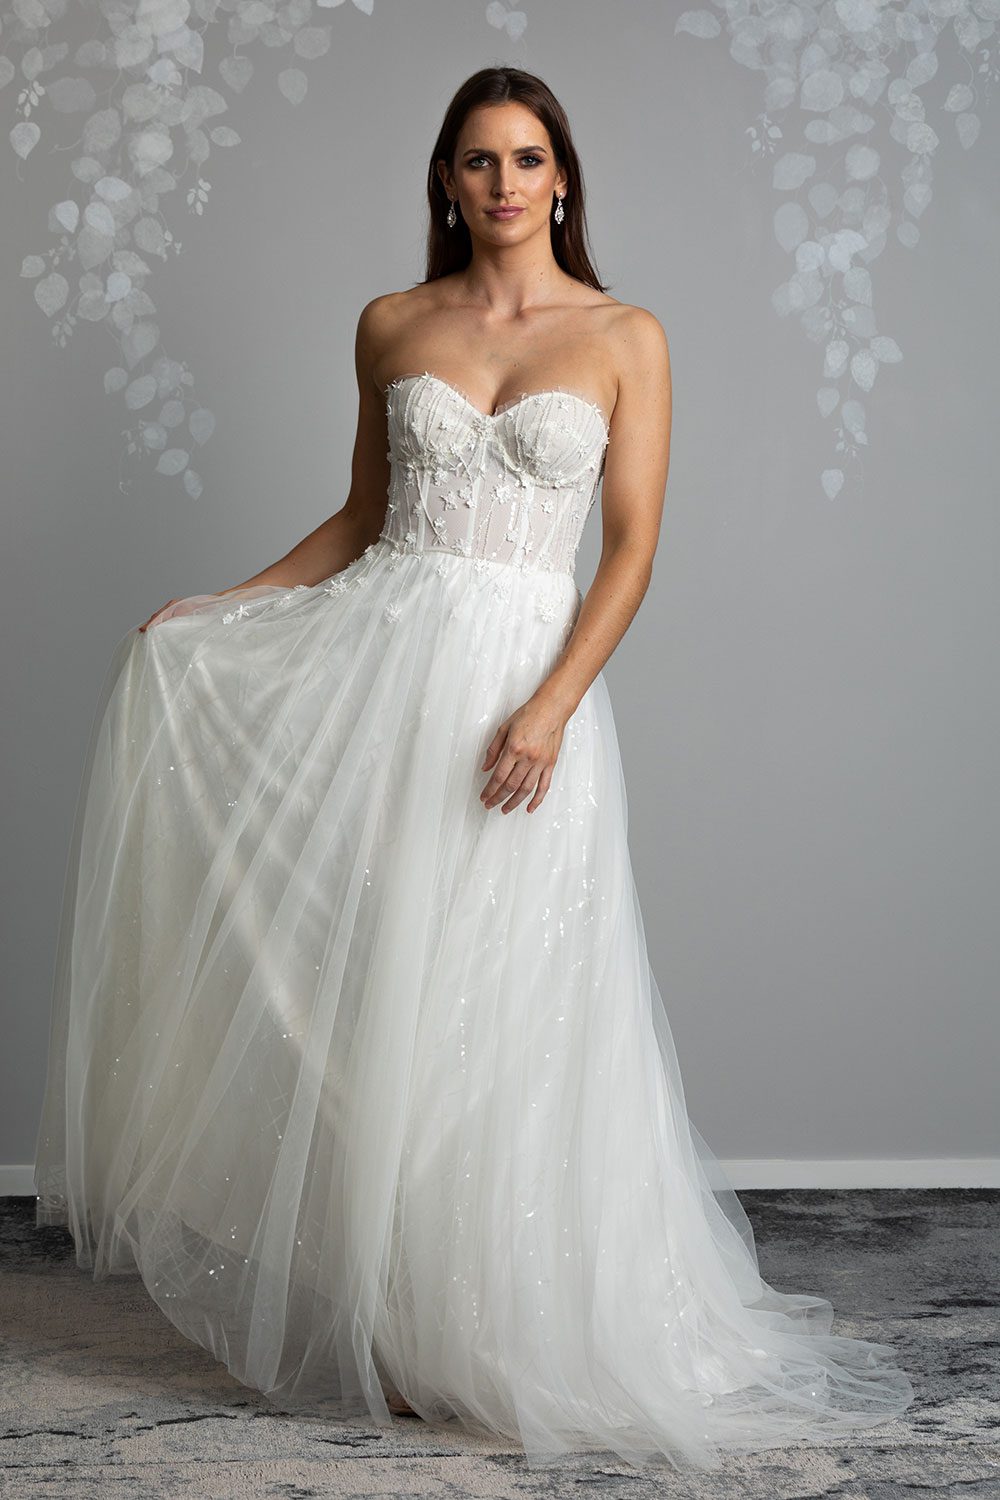 Hikari Wedding gown from Vinka Design - This modern wedding dress has a structured semi-sheer bodice with hand-appliqued lace of stars and flowers. The skirt is made with multiple layers of soft tulle. Full length image of model holding soft tulle skirt with sequined outer layer